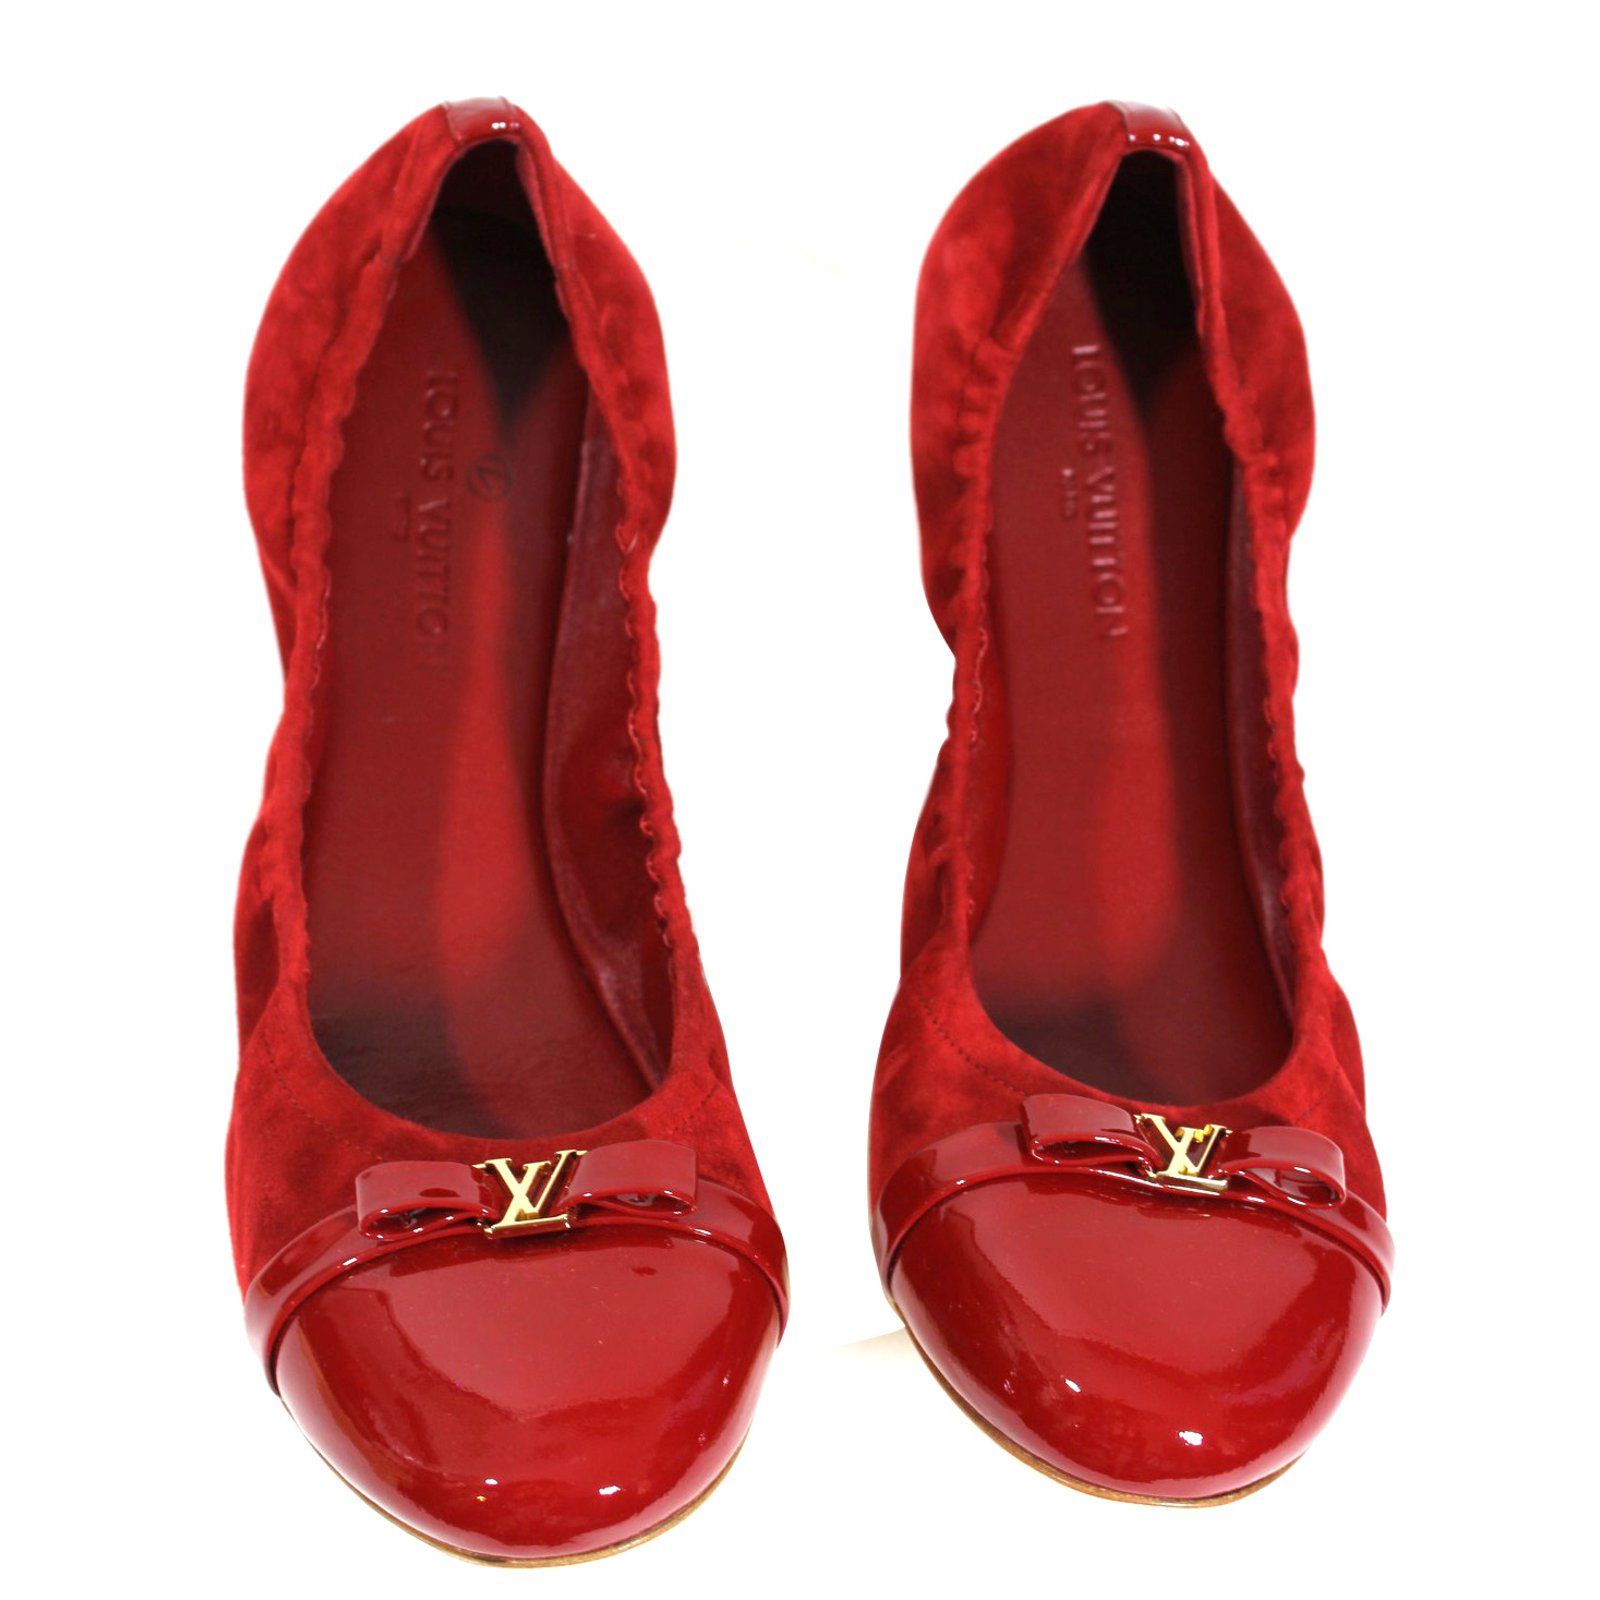 patent leather red flats